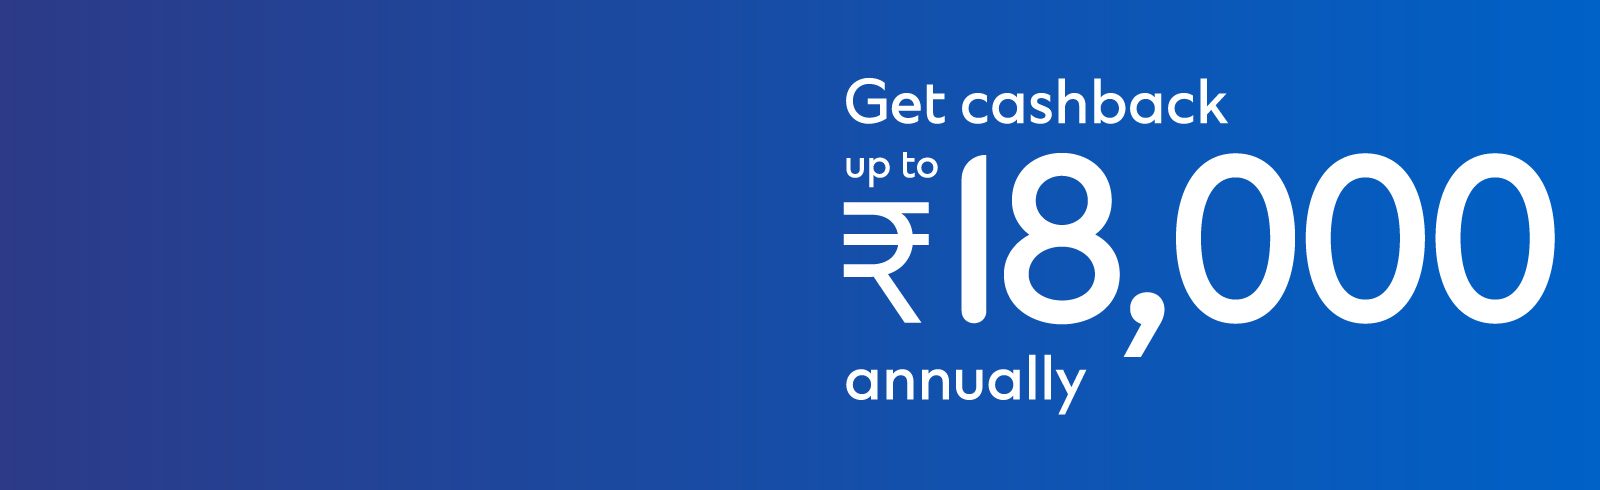 Get cashback up to Rs.18,000 with SC Smart Card